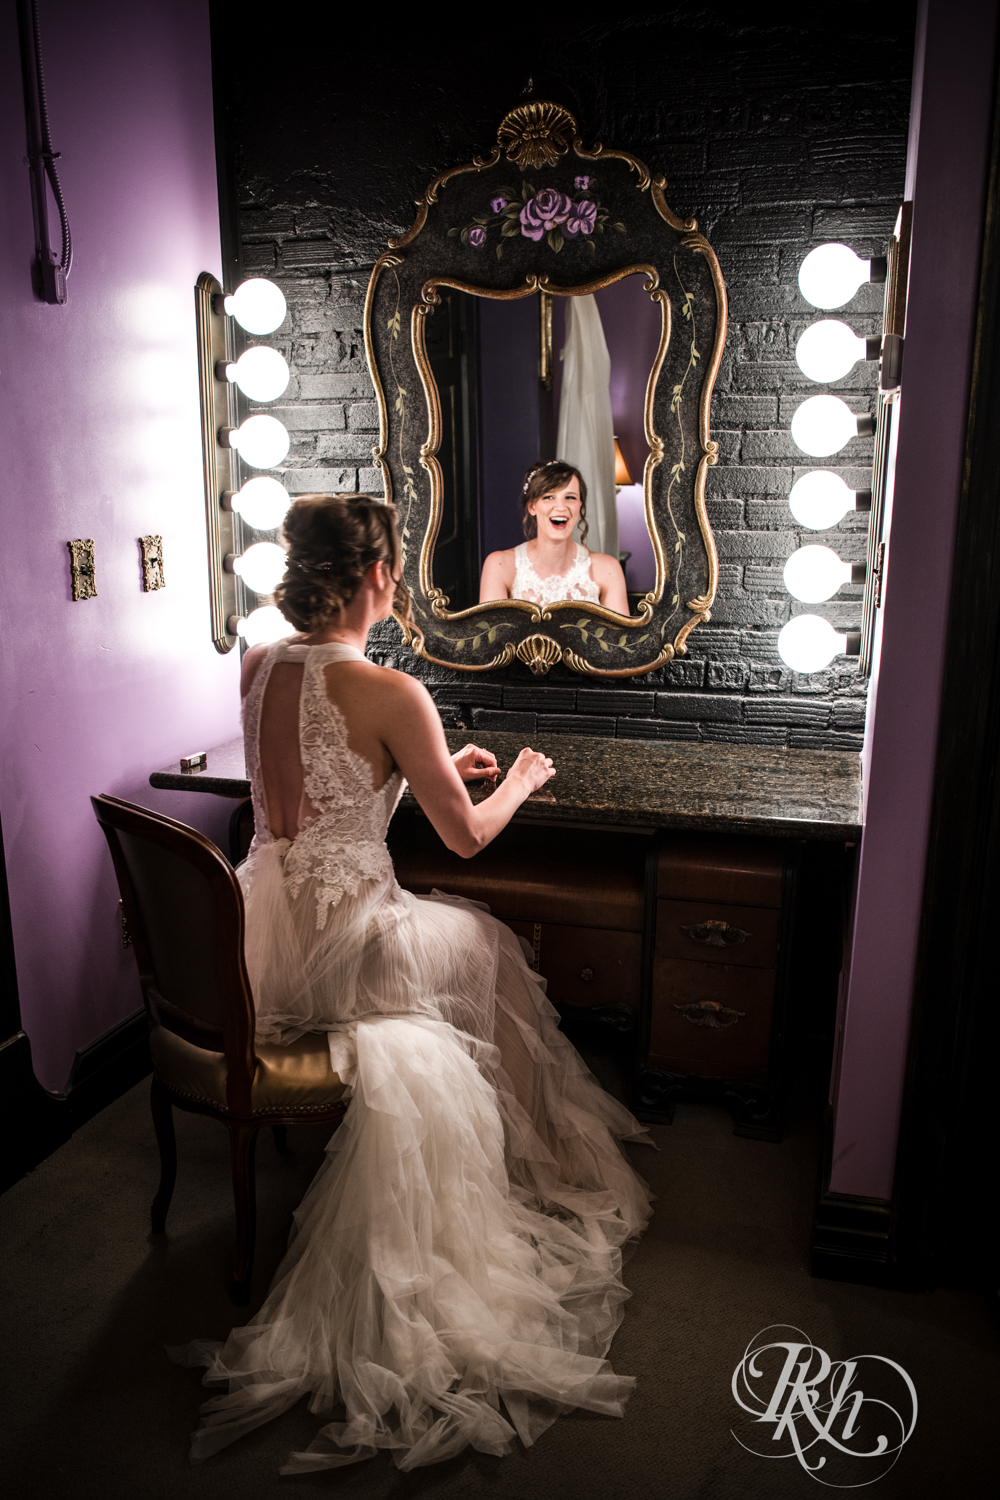 Bride laughing in getting ready suite at Kellerman's Event Center in White Bear Lake, Minnesota.